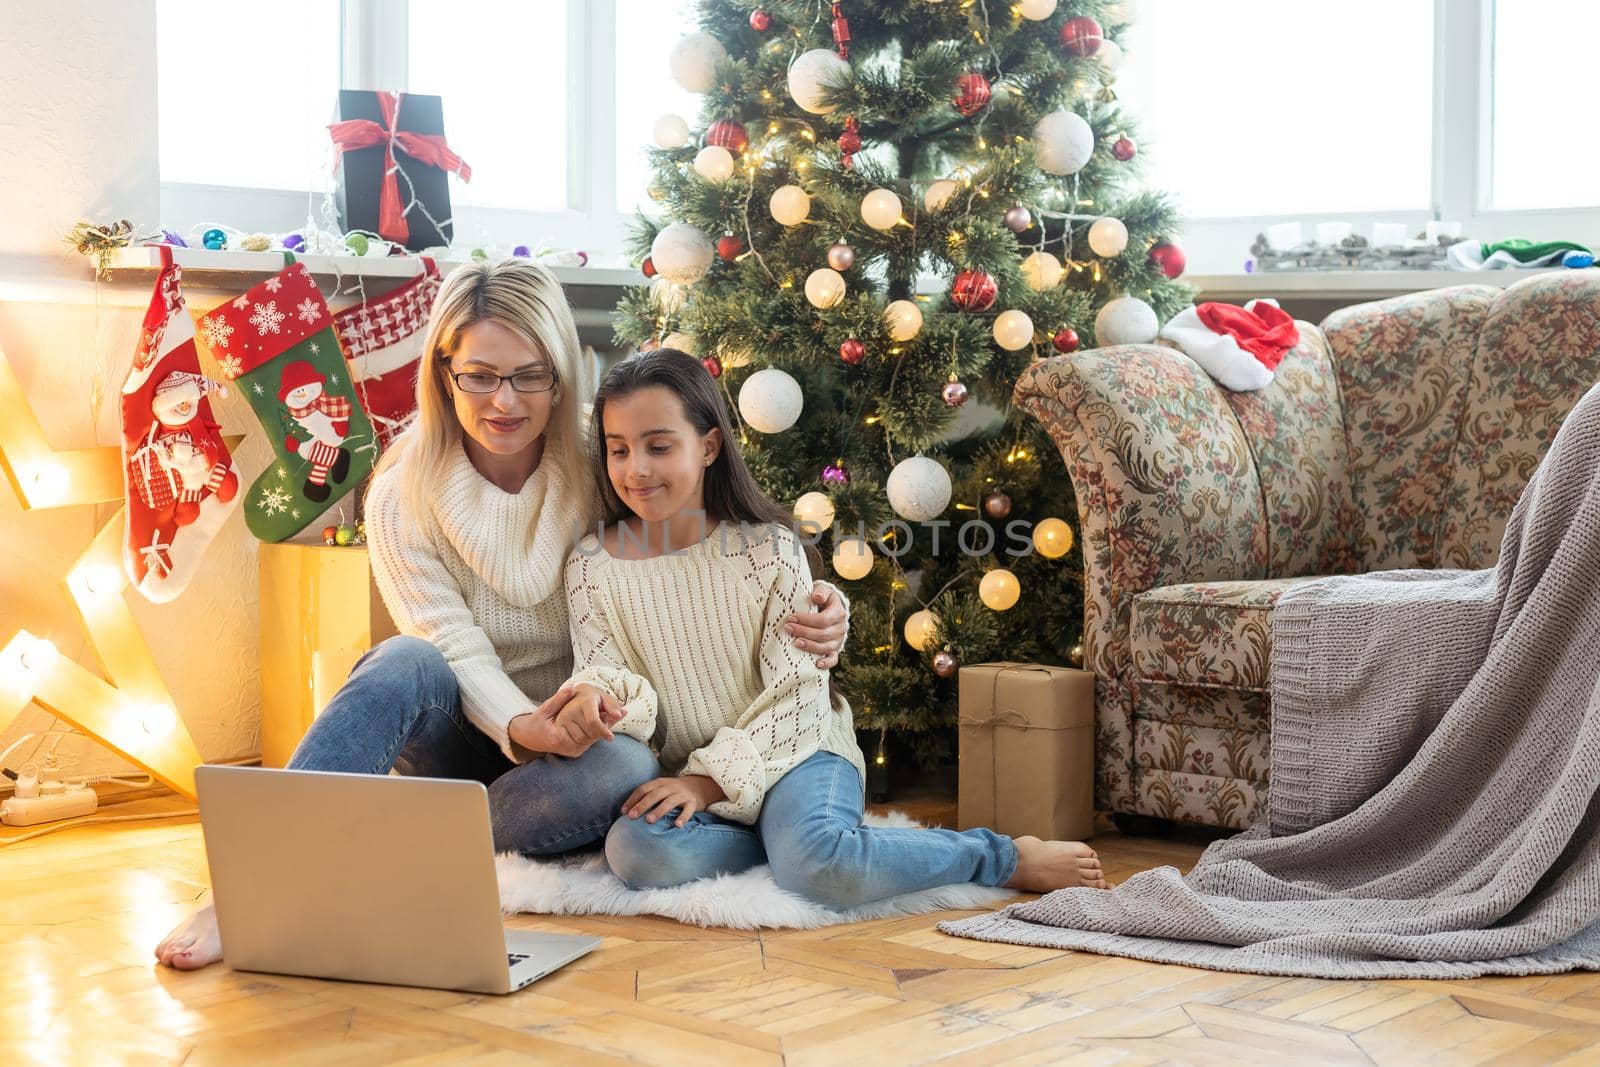 Indoor shot of beautiful happy young woman shopping online on laptop in cozy Christmas interior. Mother on the floor next the Christmas tree and sofa and daughter embrace her, shopping gifts